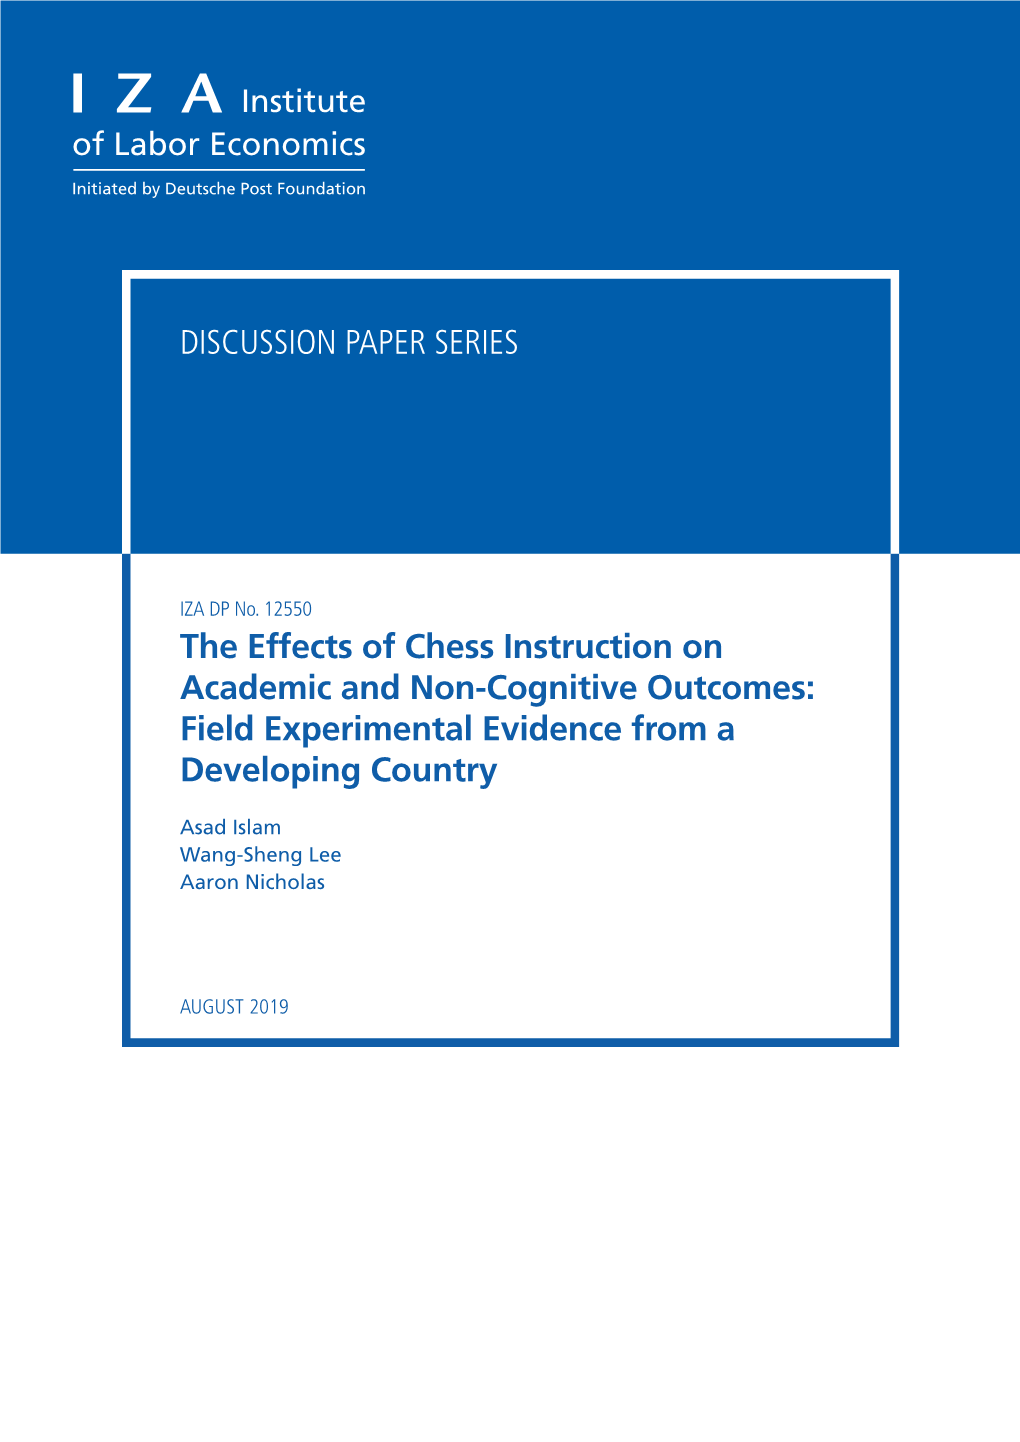 The Effects of Chess Instruction on Academic and Non-Cognitive Outcomes: Field Experimental Evidence from a Developing Country